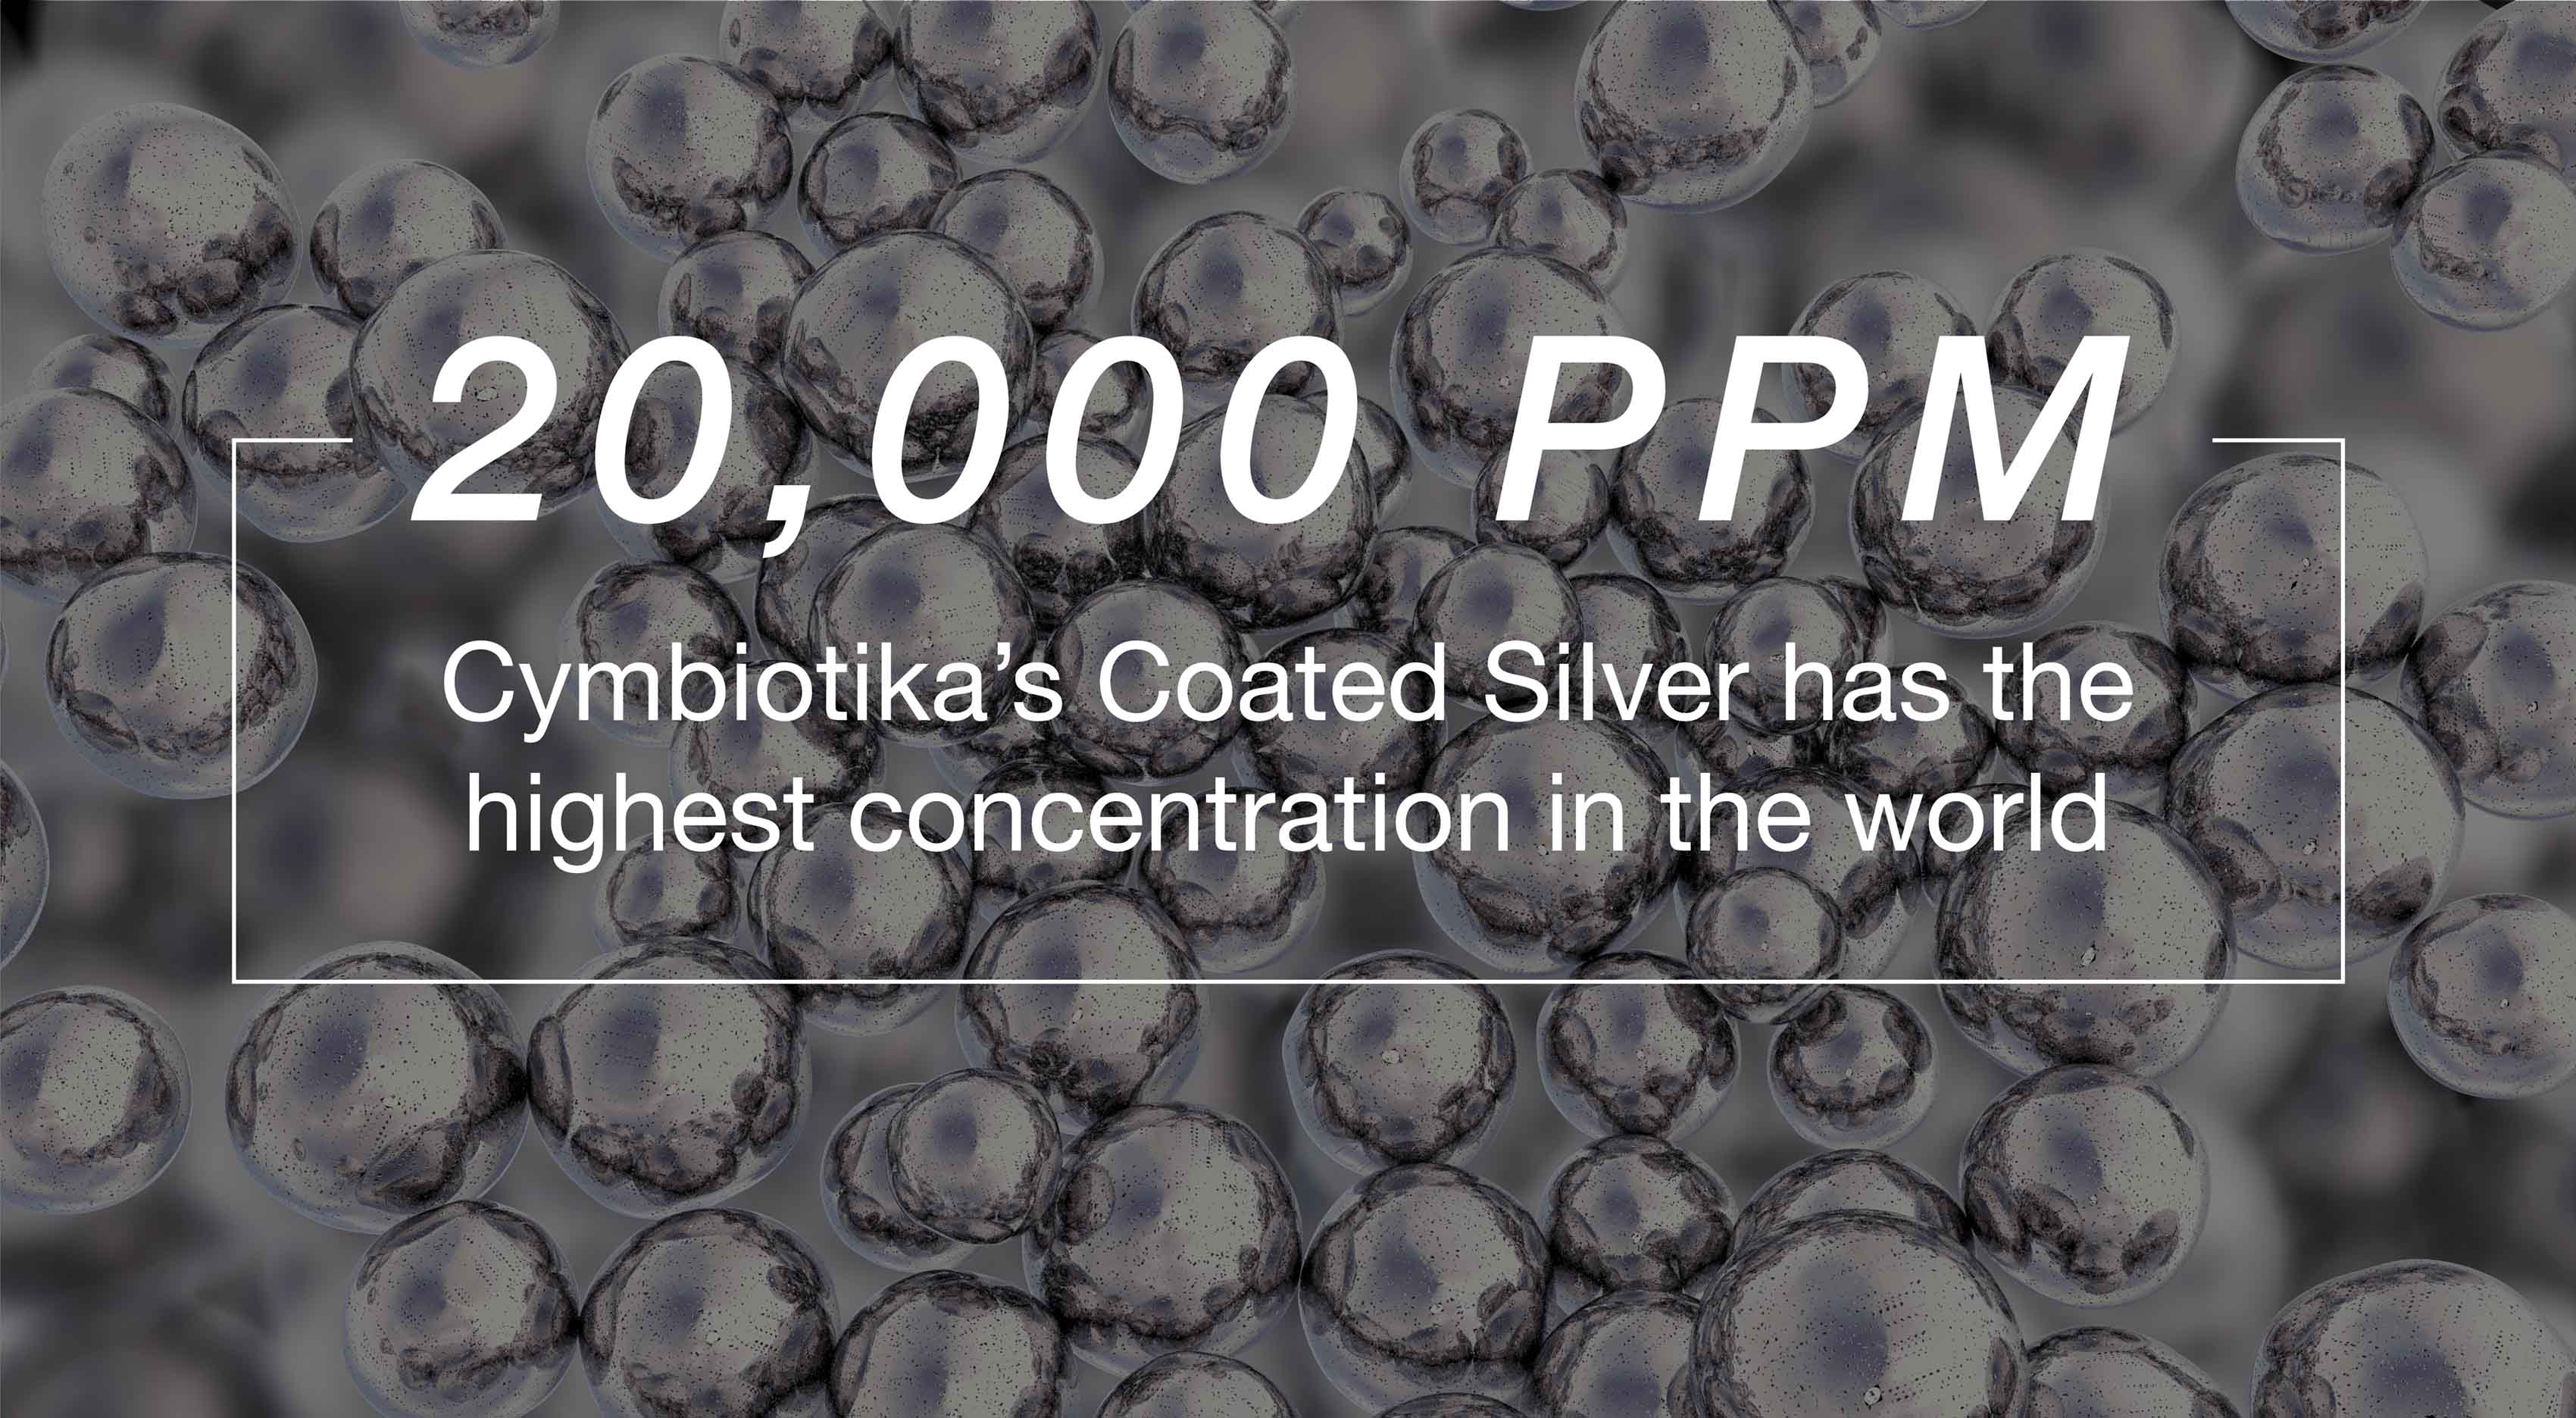 At 20,000, Cymbiotika's Coated Silver has the highest concentration in the world.